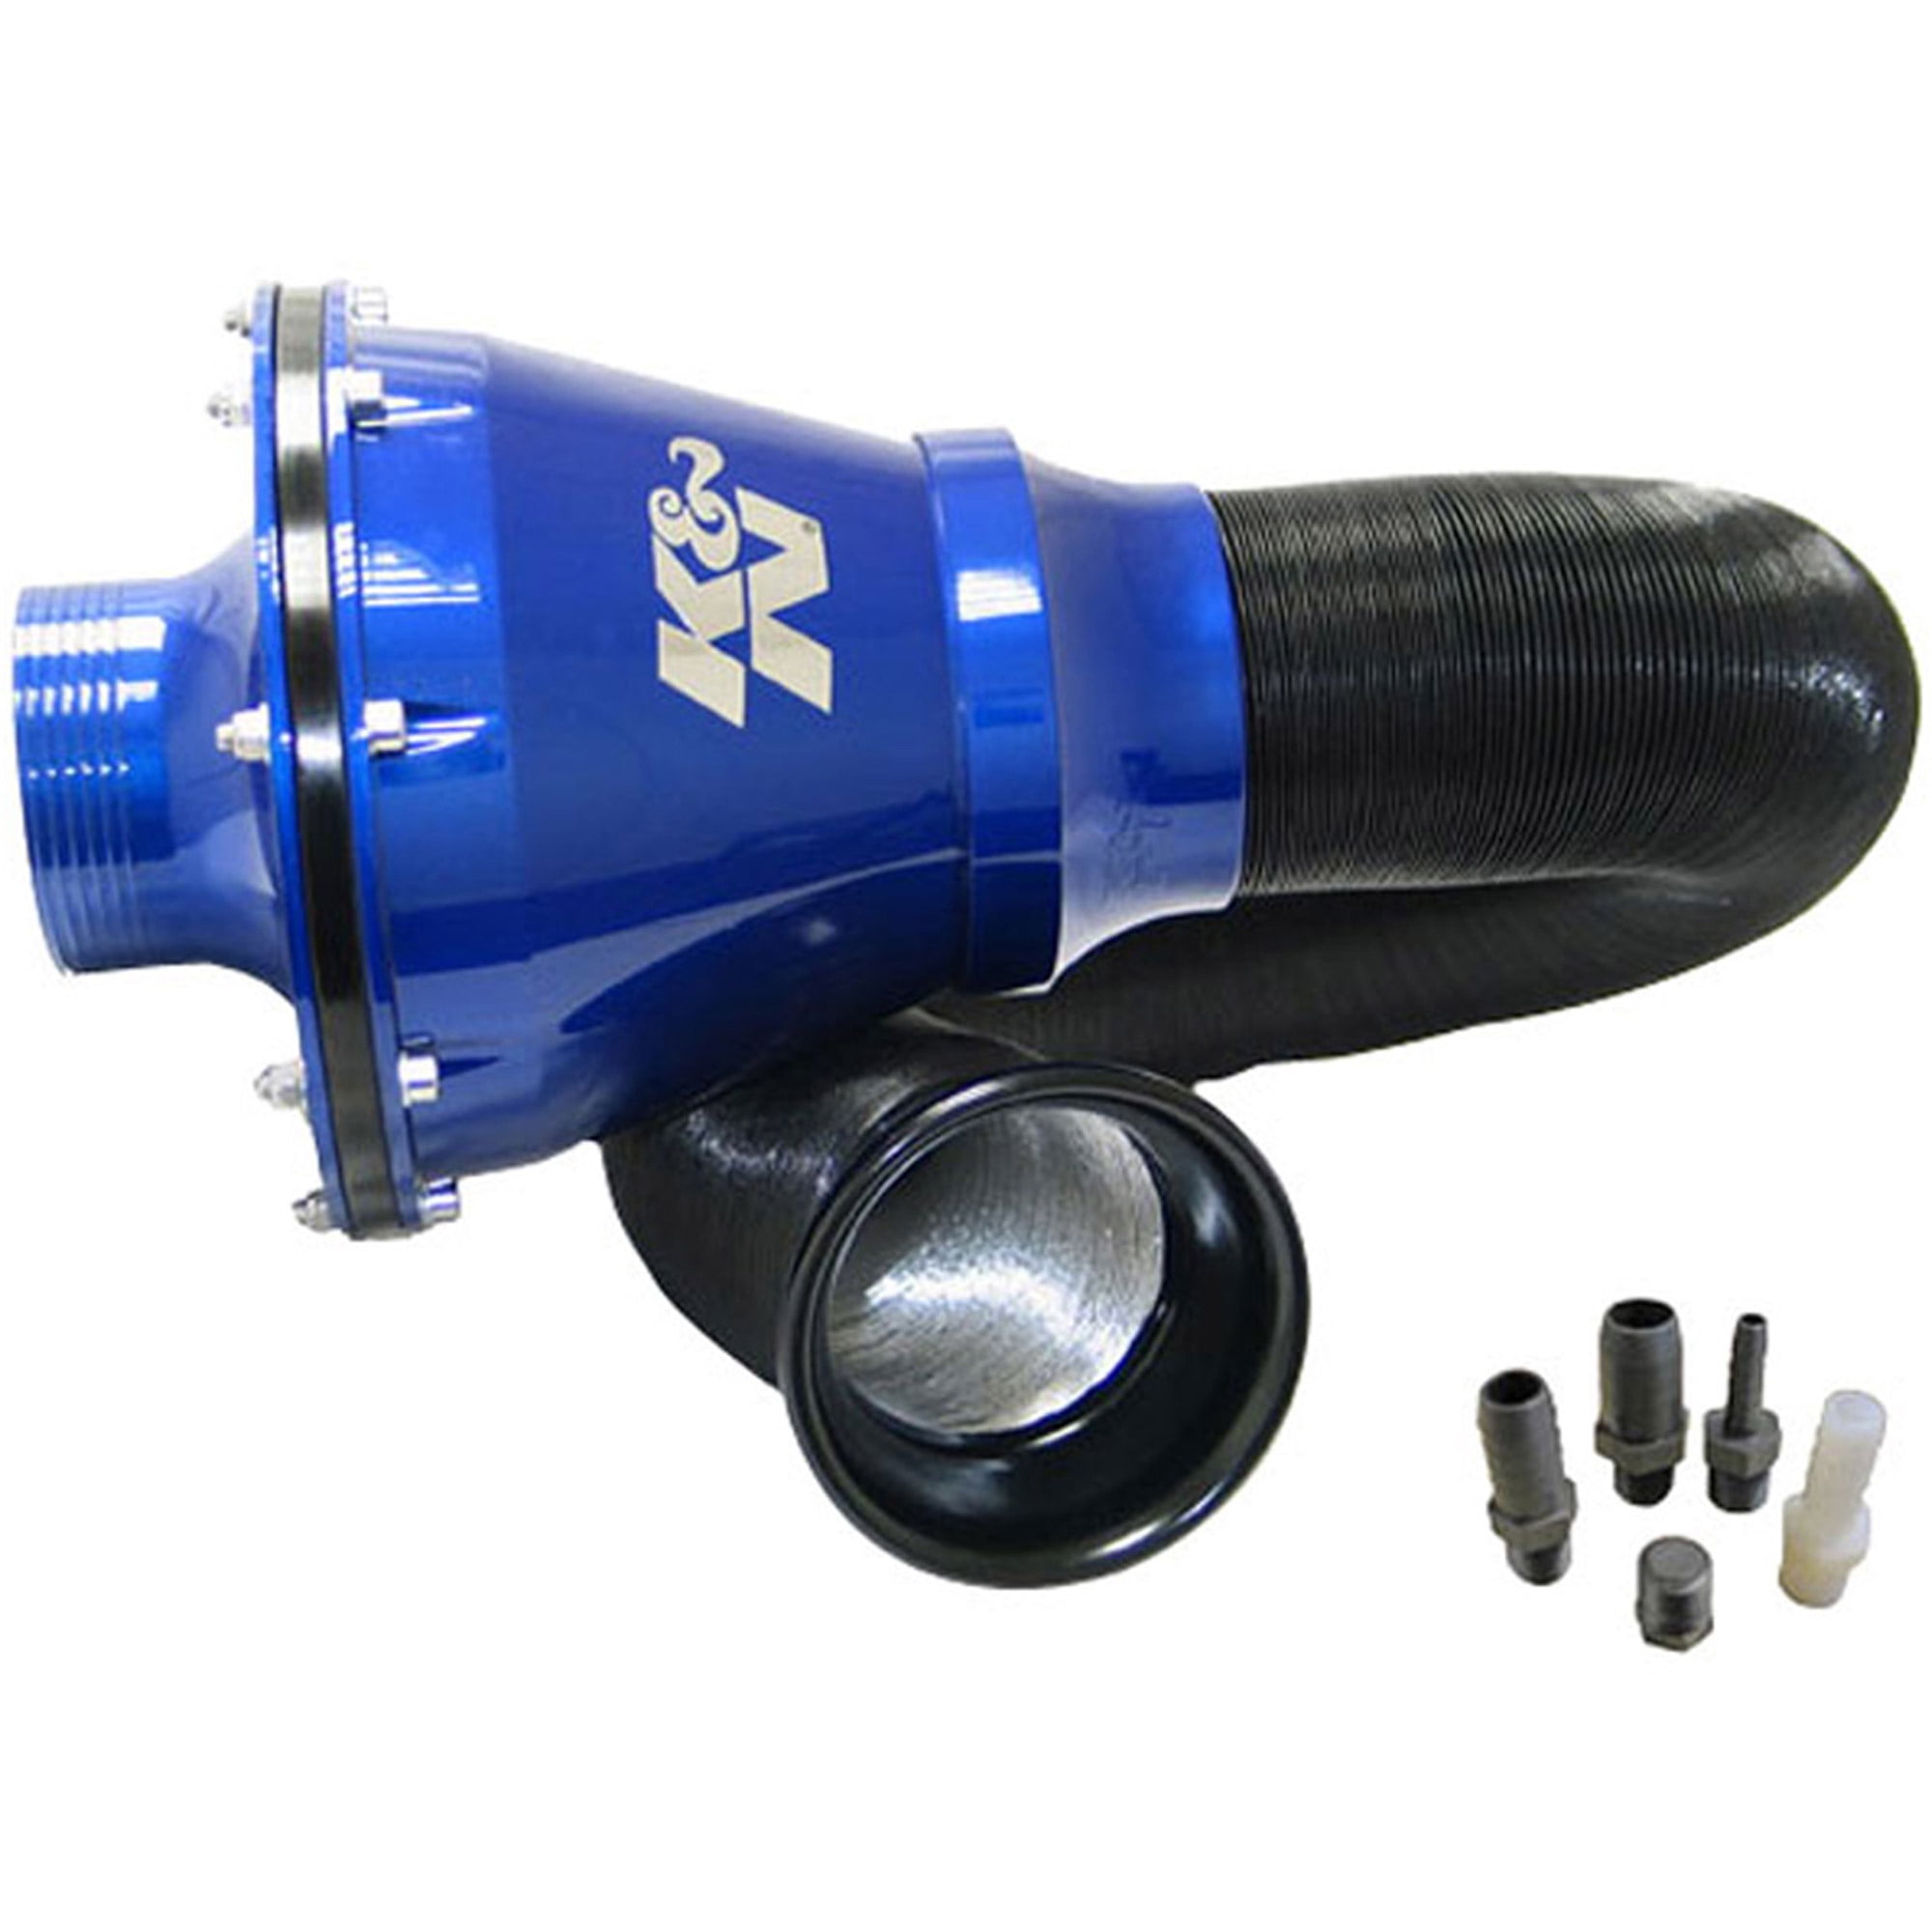 Fits 3 Inches Race Performance Cold Blue Air Intake Cone Filter Universal